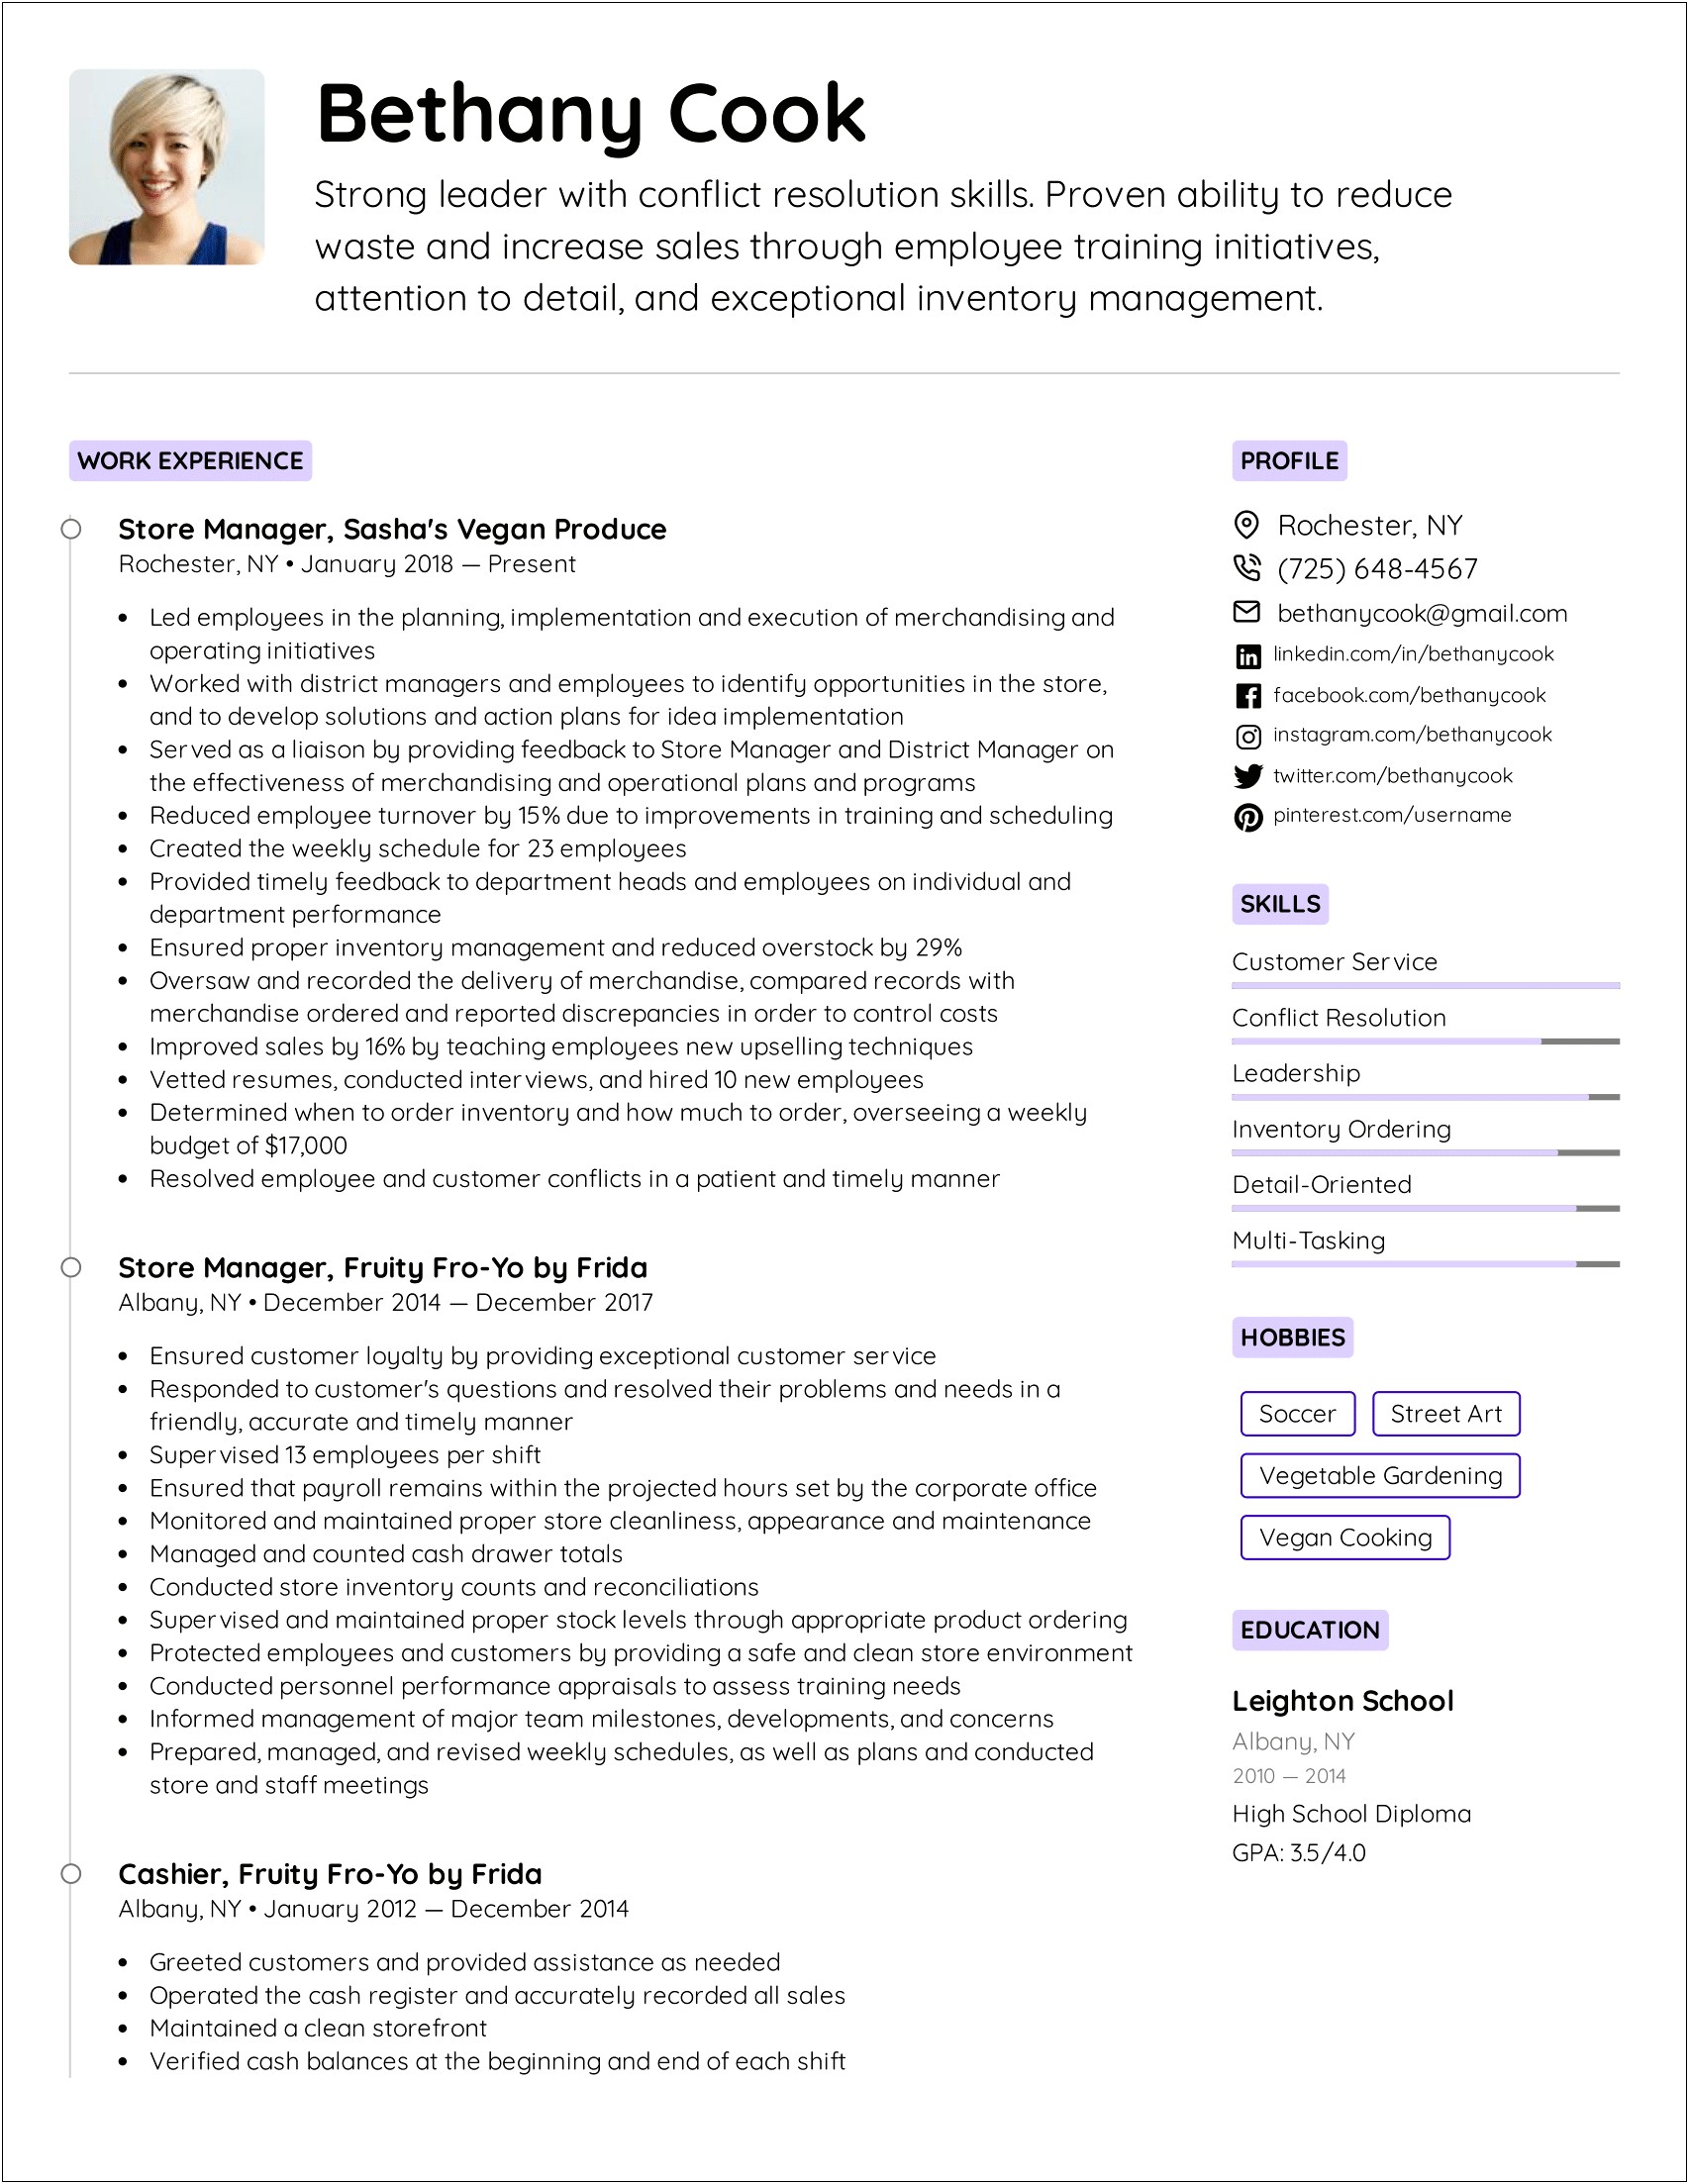 Sample Resume For Retail And Customer Service